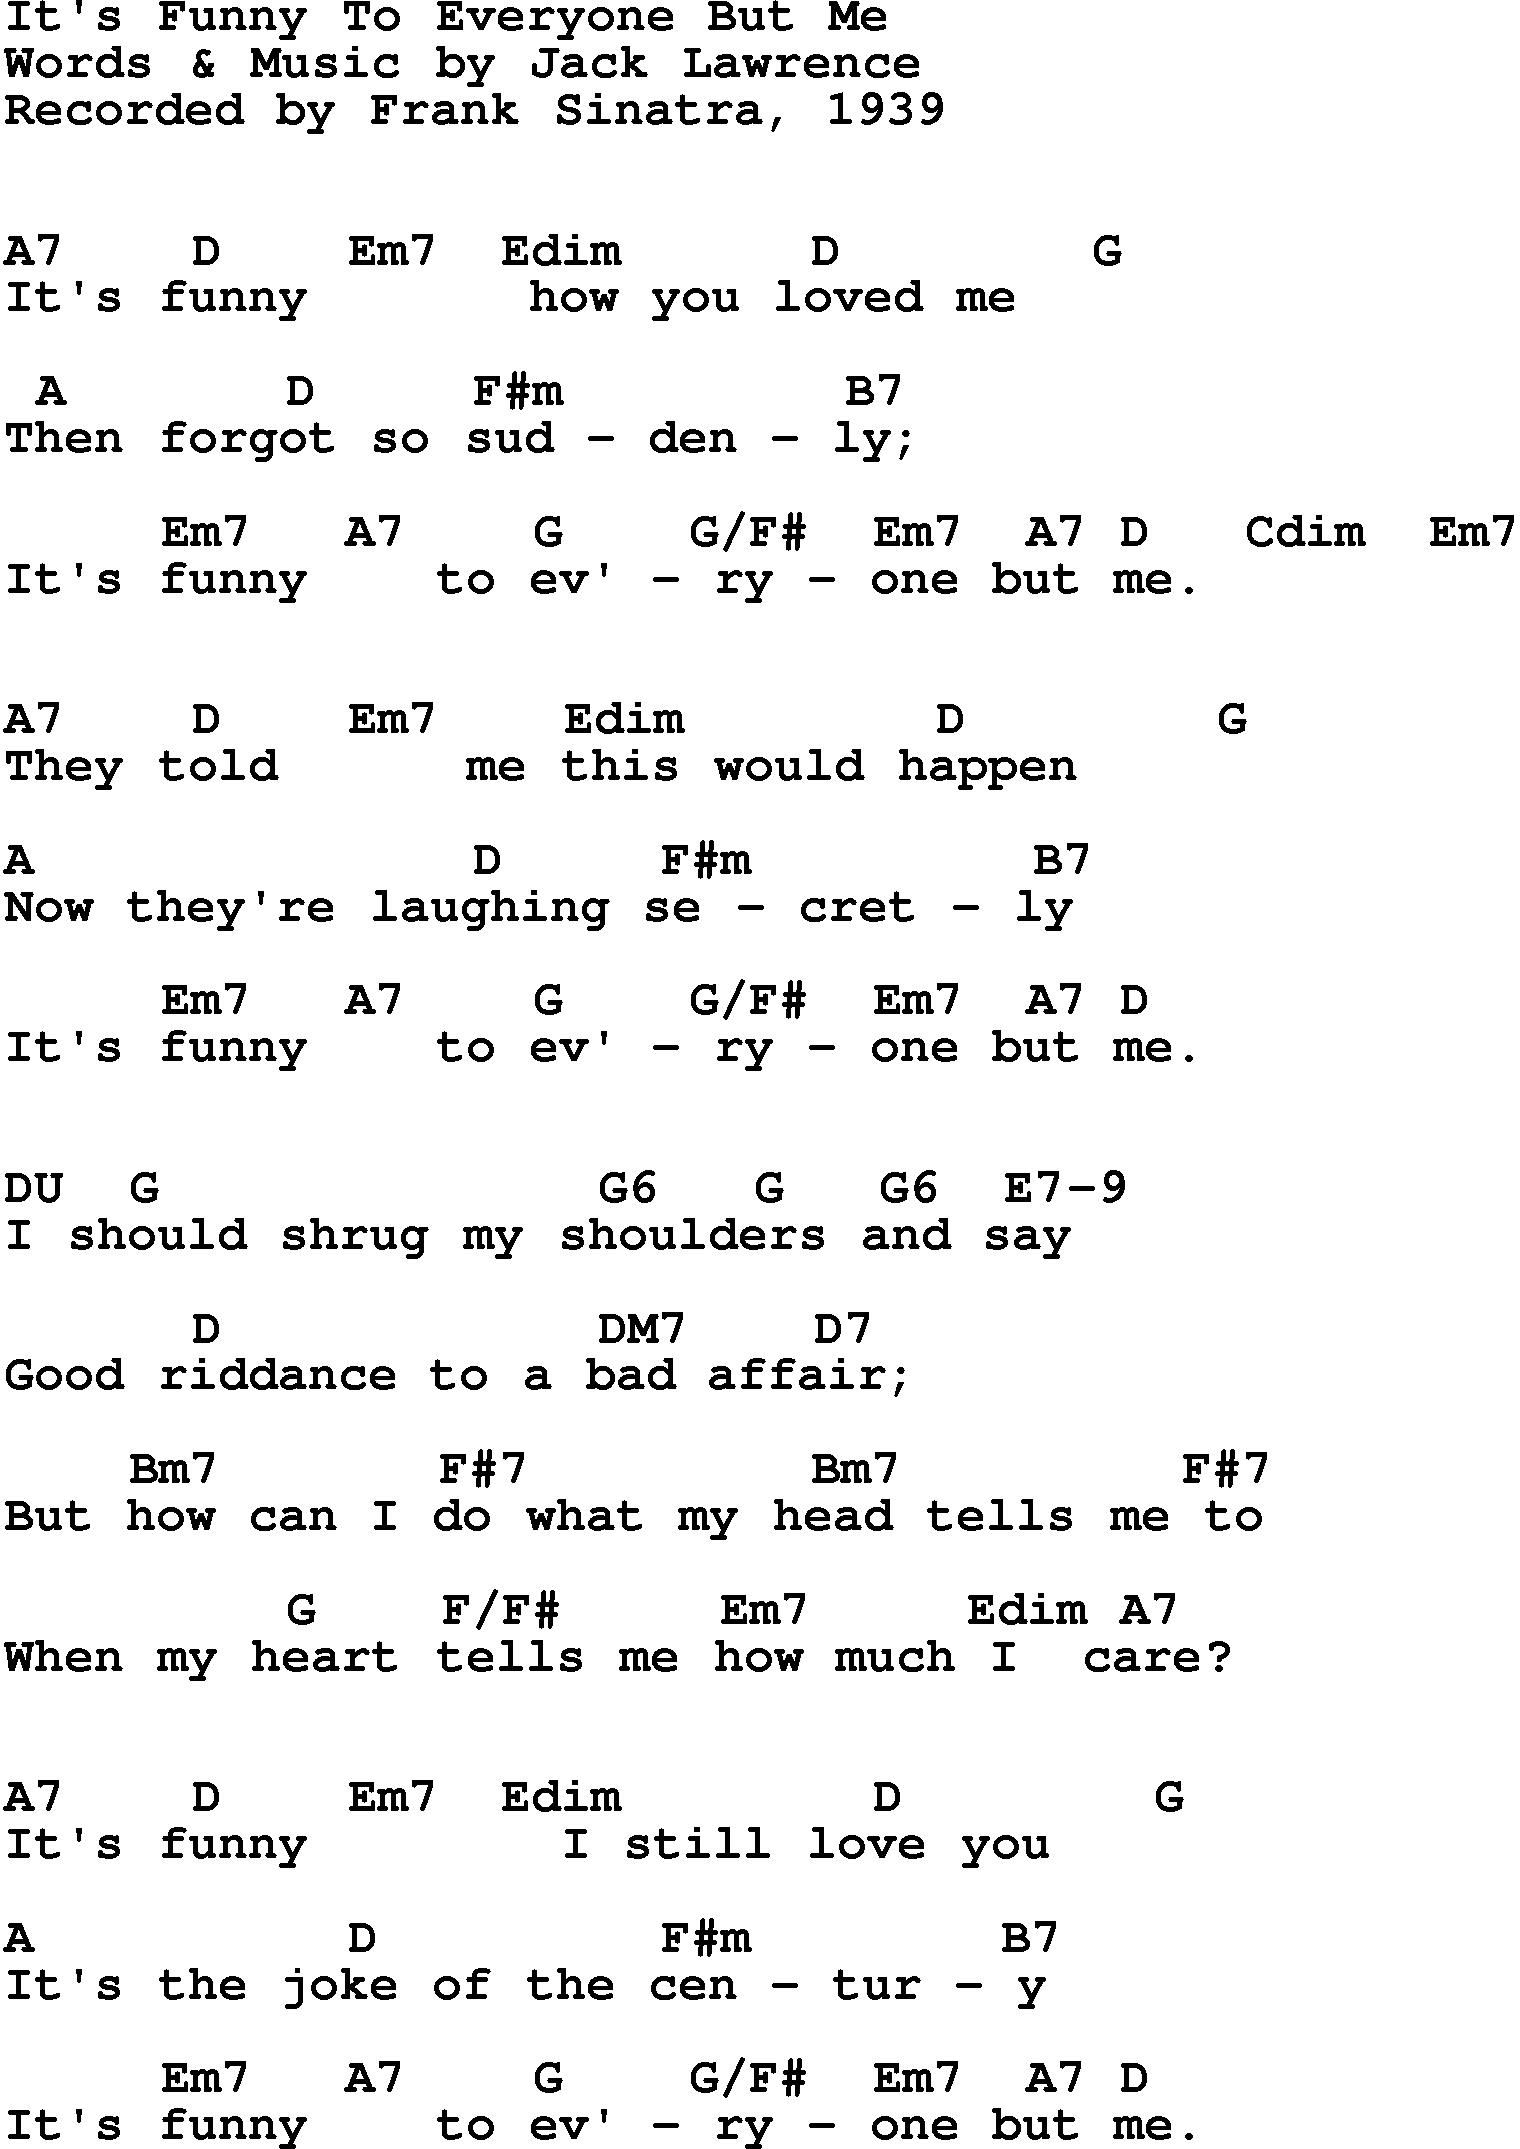 Song Lyrics with guitar chords for It's Funny To Everyone But Me - Frank Sinatra, 1939